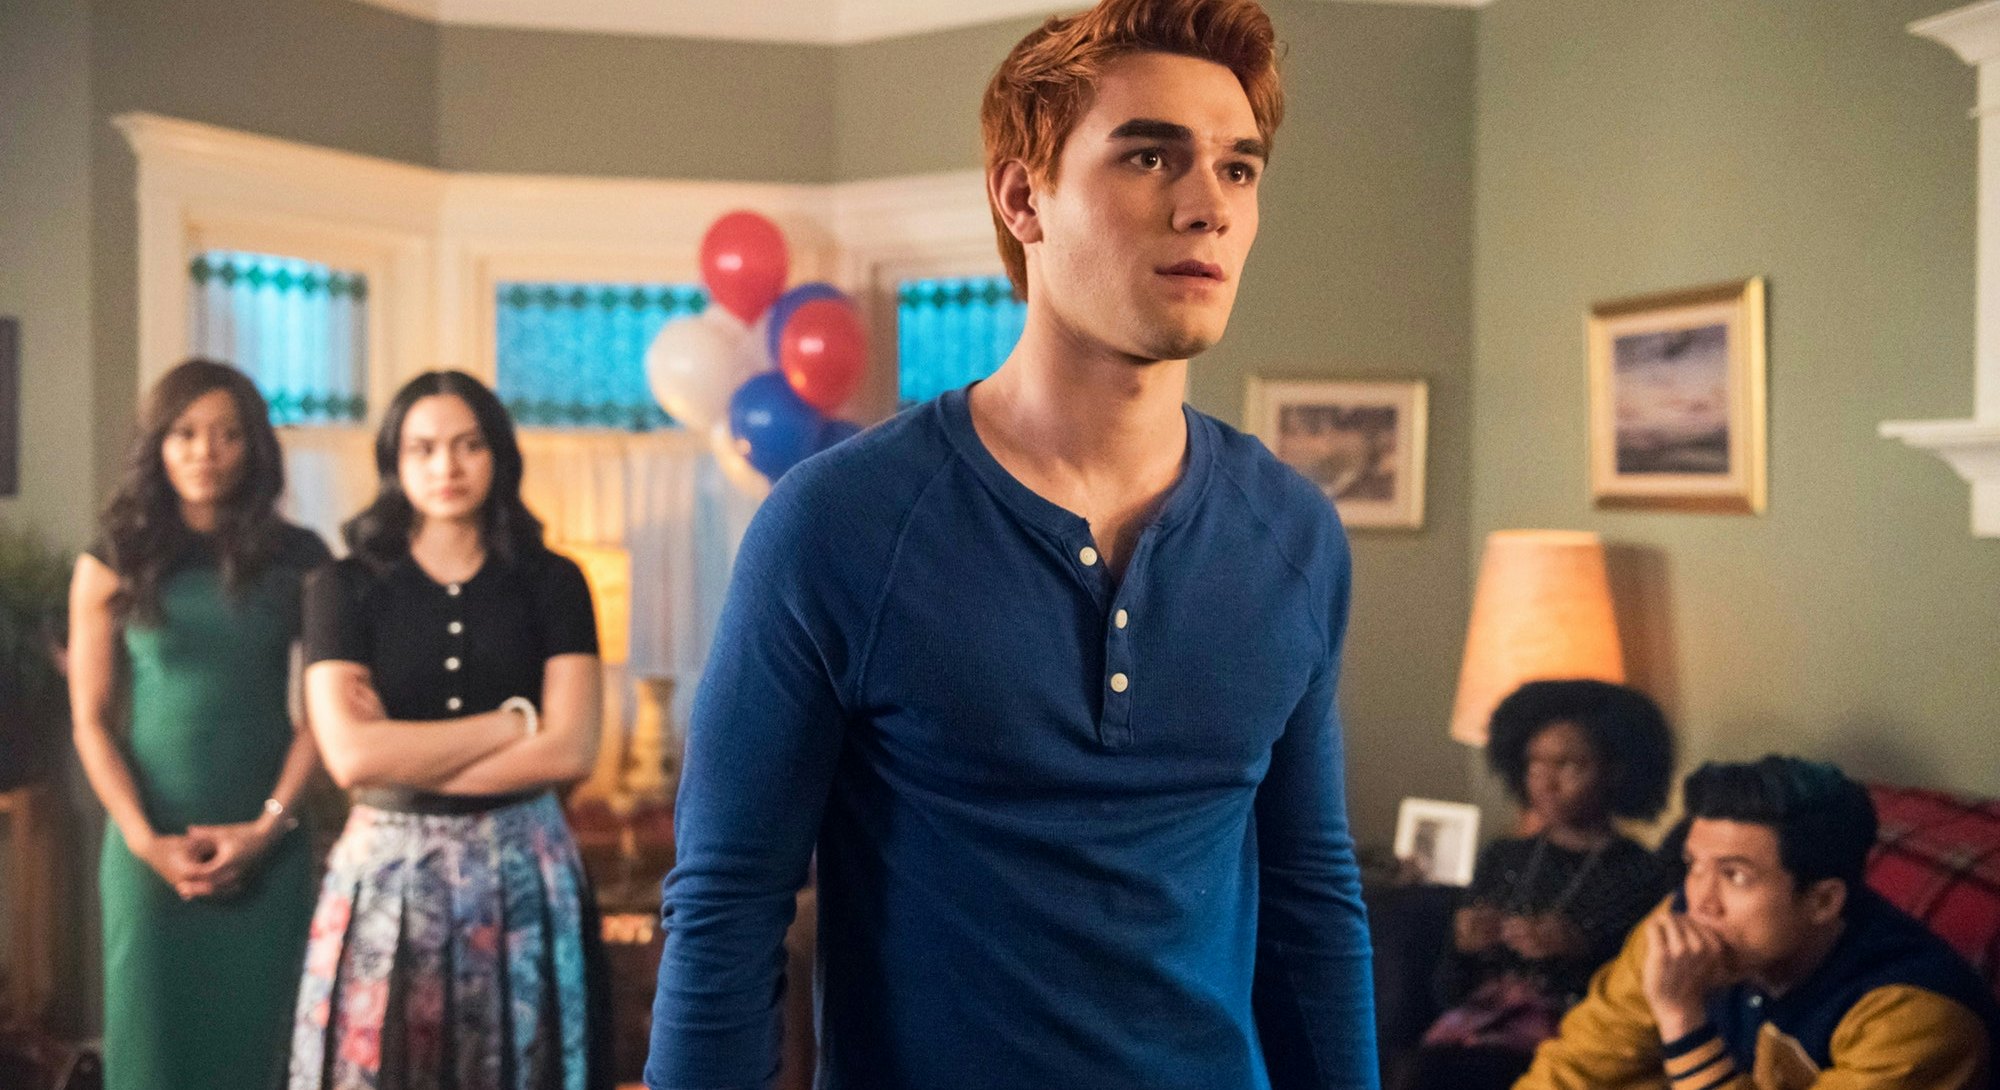 JK Apa as Archie Andrews in one of many unhinged moments from Riverdale.